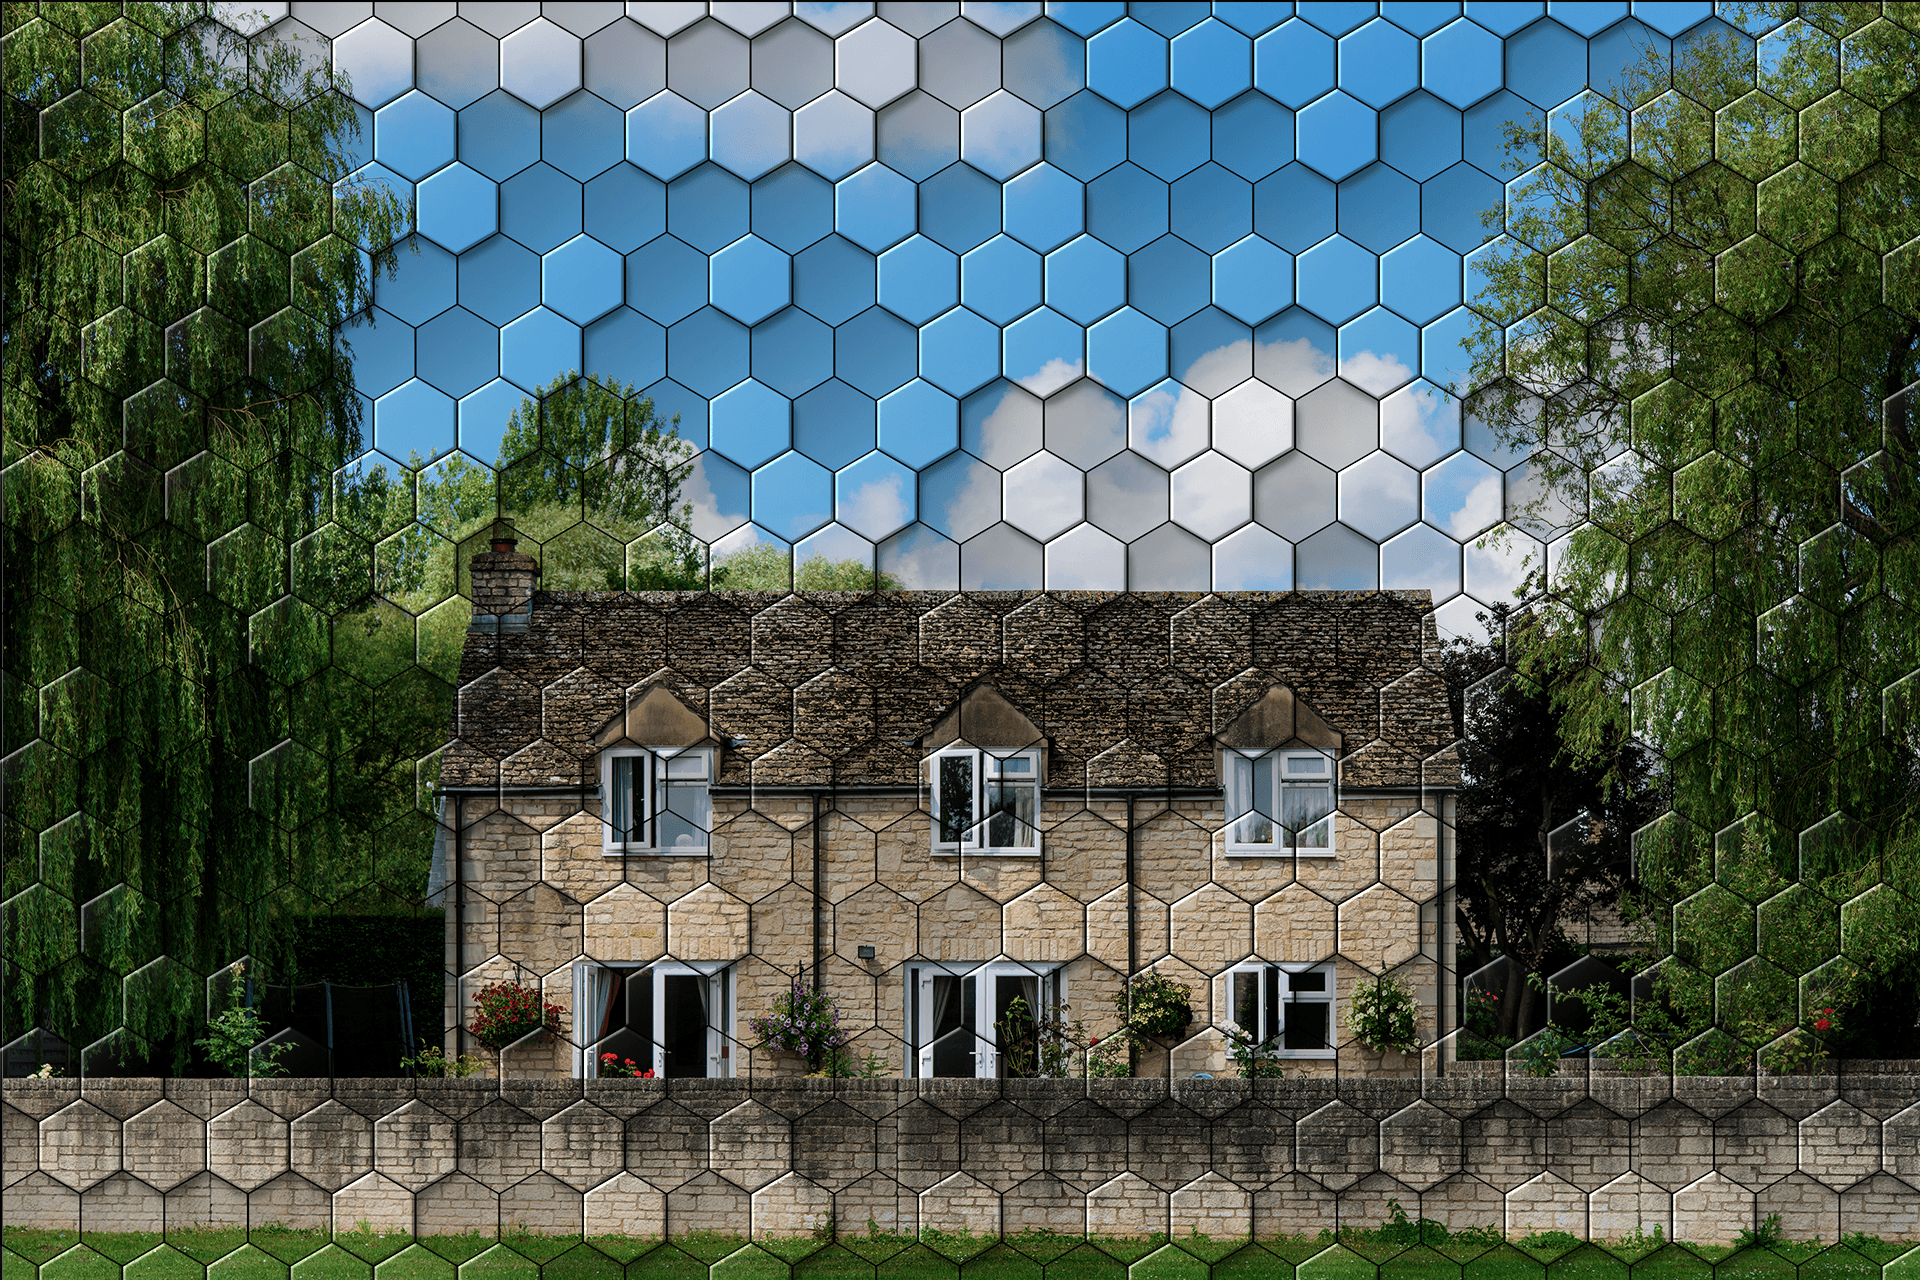 House with hexagon pattern over it